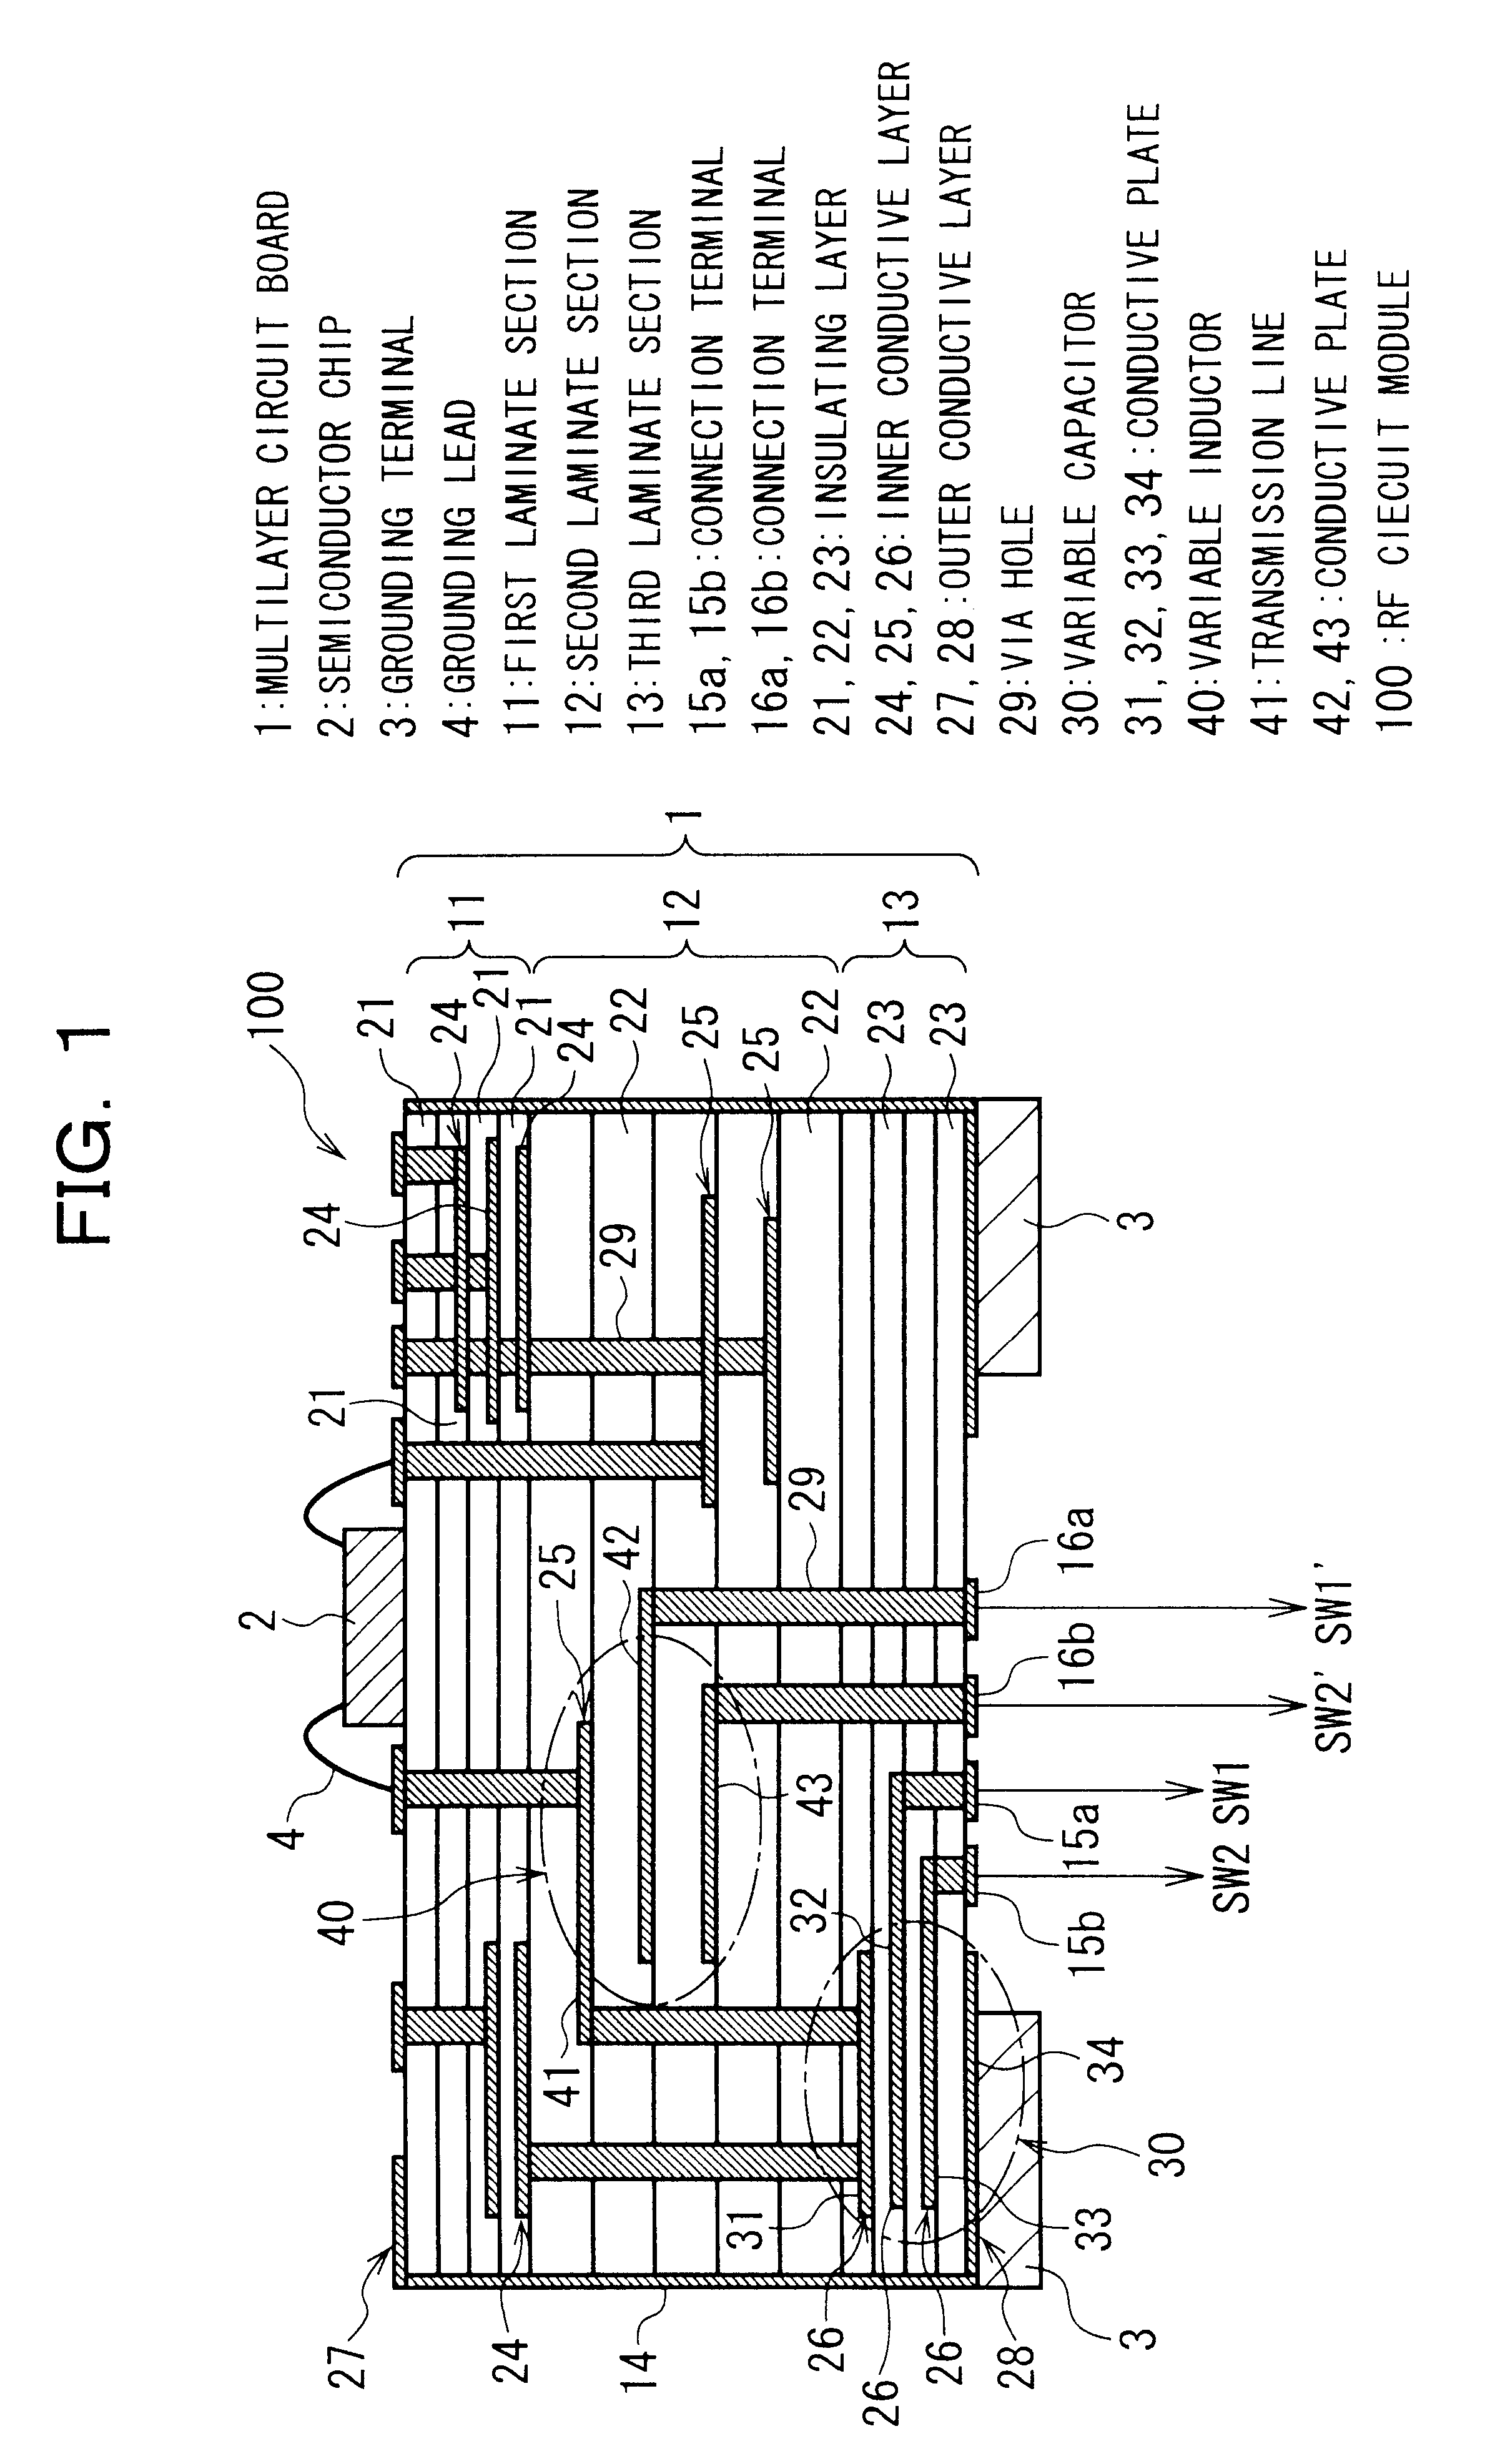 Variable capacitor and a variable inductor